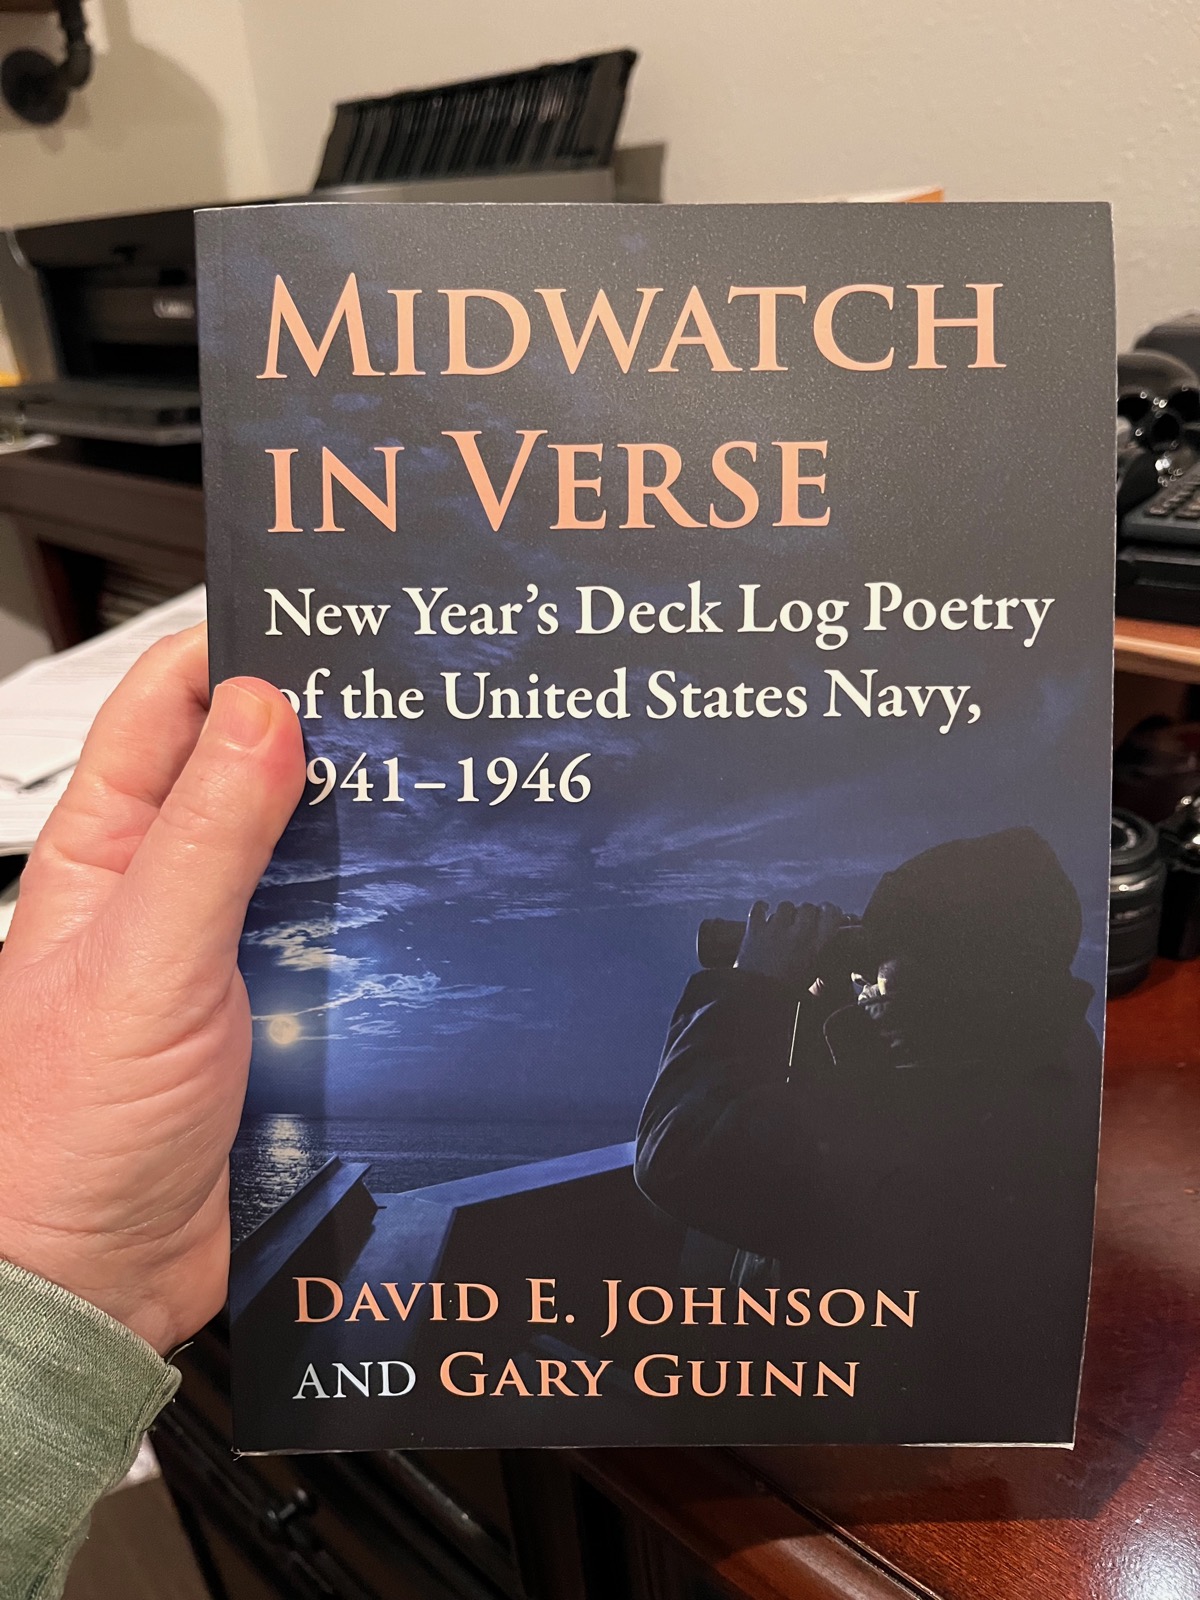 Photo of a book called Midwatch in Verse, New Year's Deck Log Poetry of the United States Navy, 1941-1946